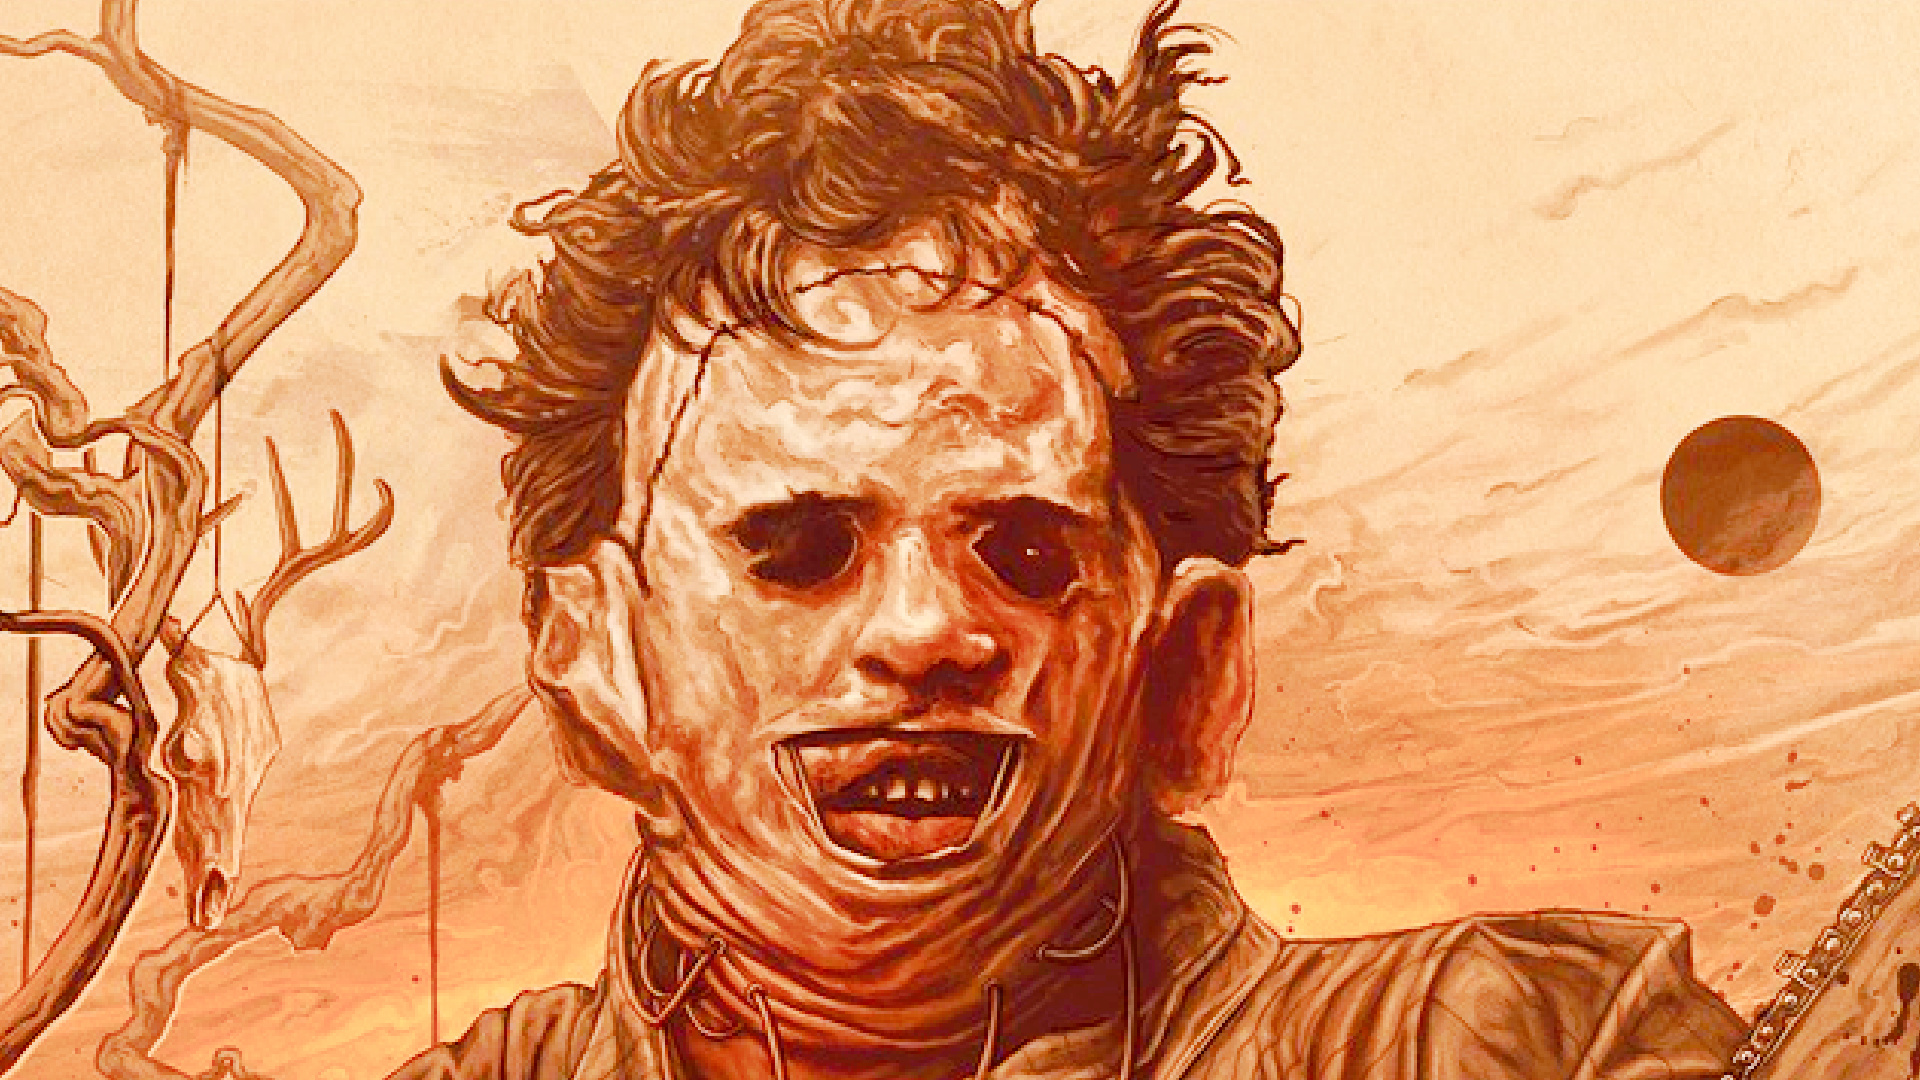 The Texas Chainsaw Massacre blows up with free Steam weekend, update